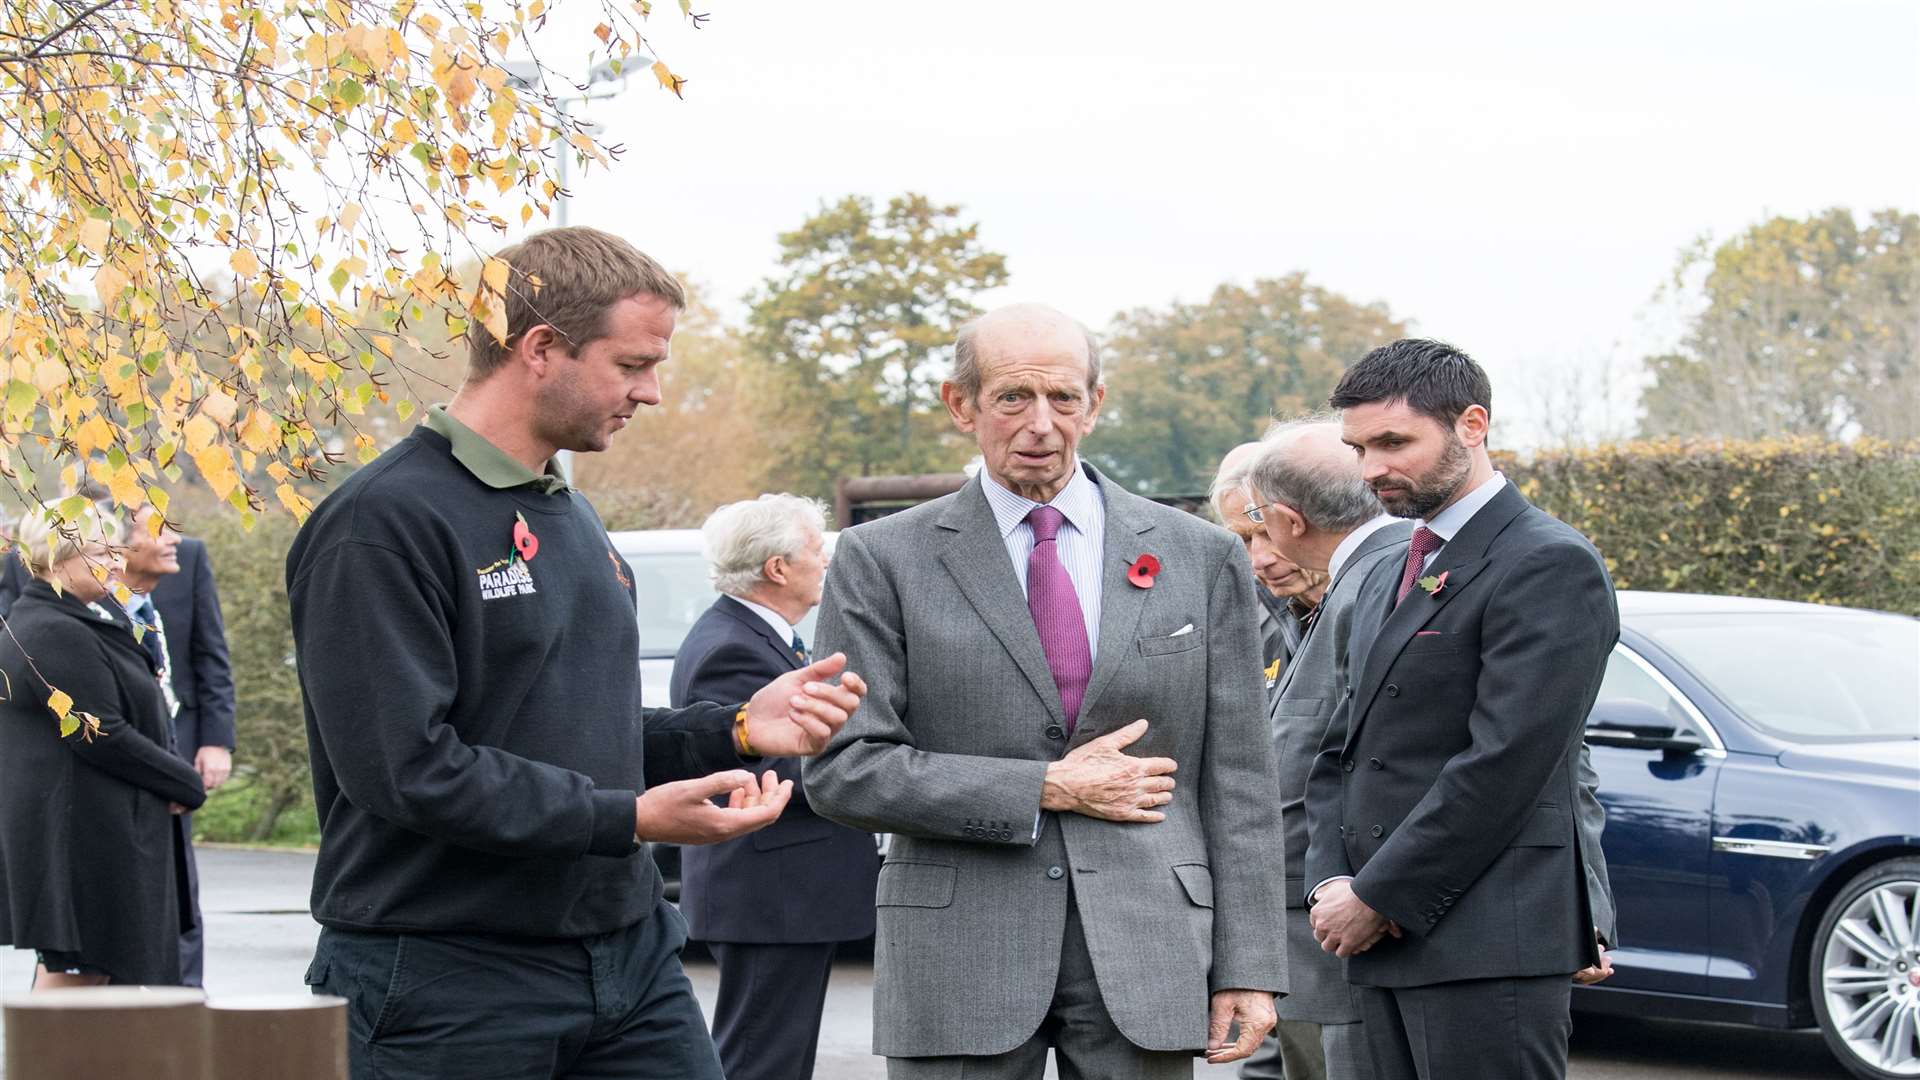 The Duke of Kent meets officials at The Big Cat Sanctuary in Smarden